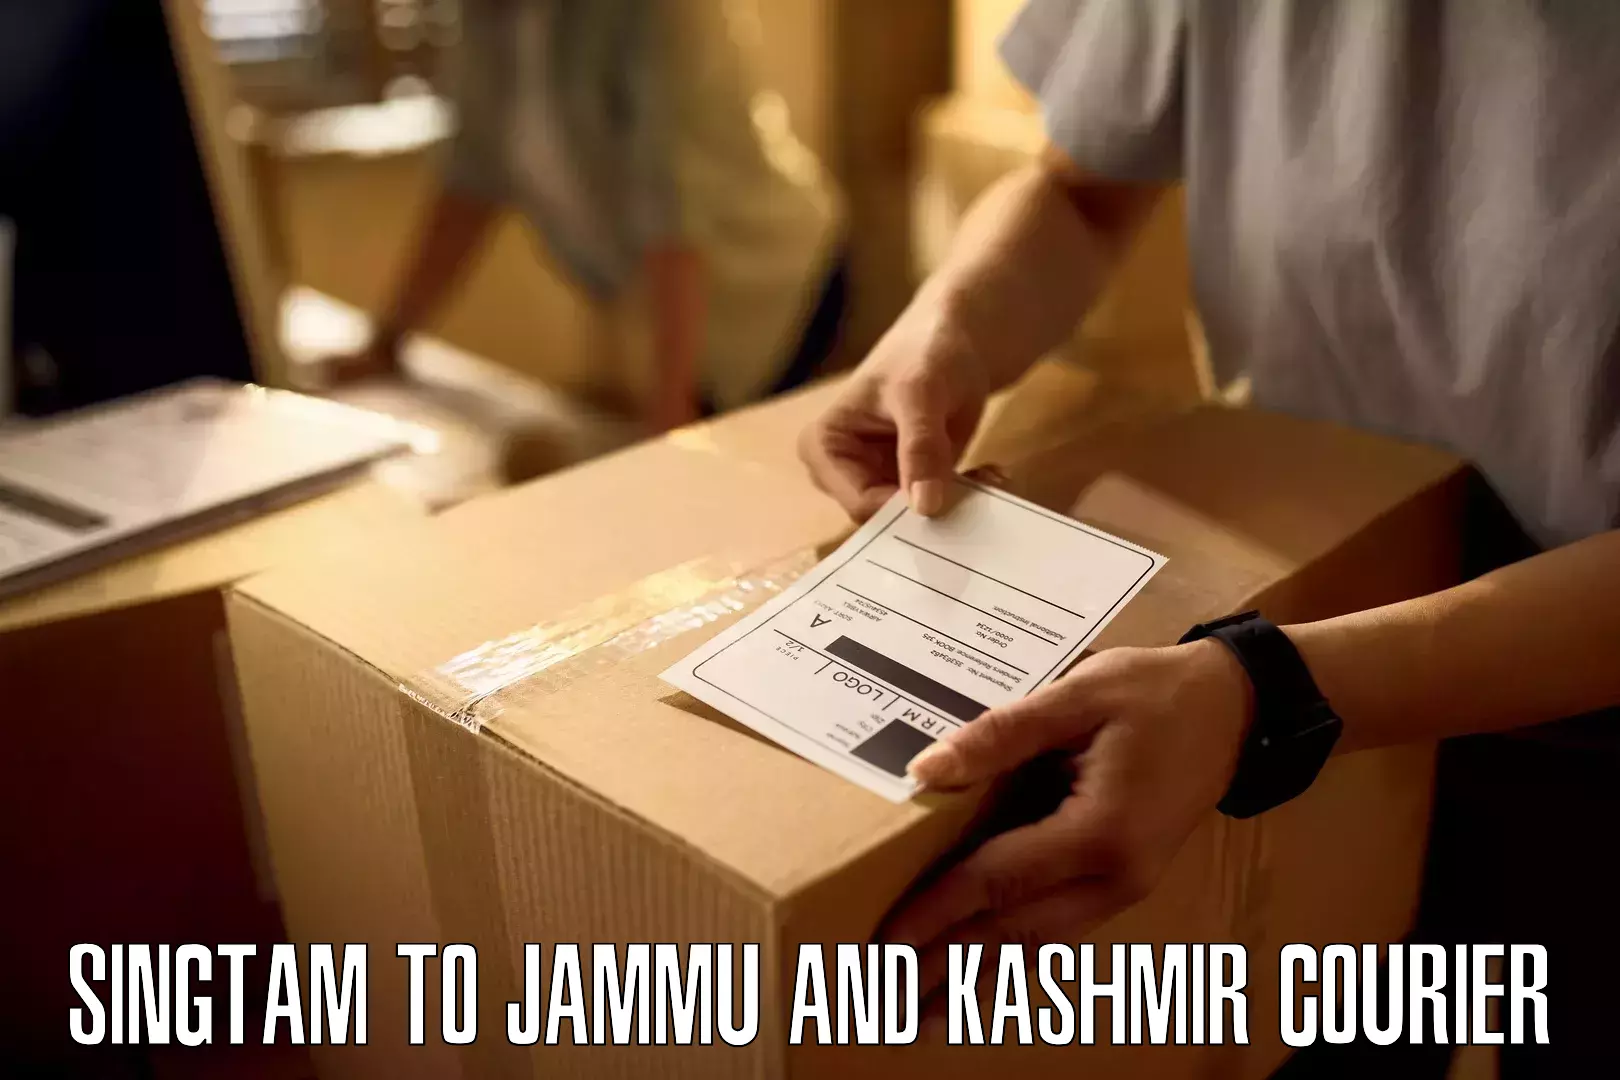 State-of-the-art courier technology Singtam to Anantnag